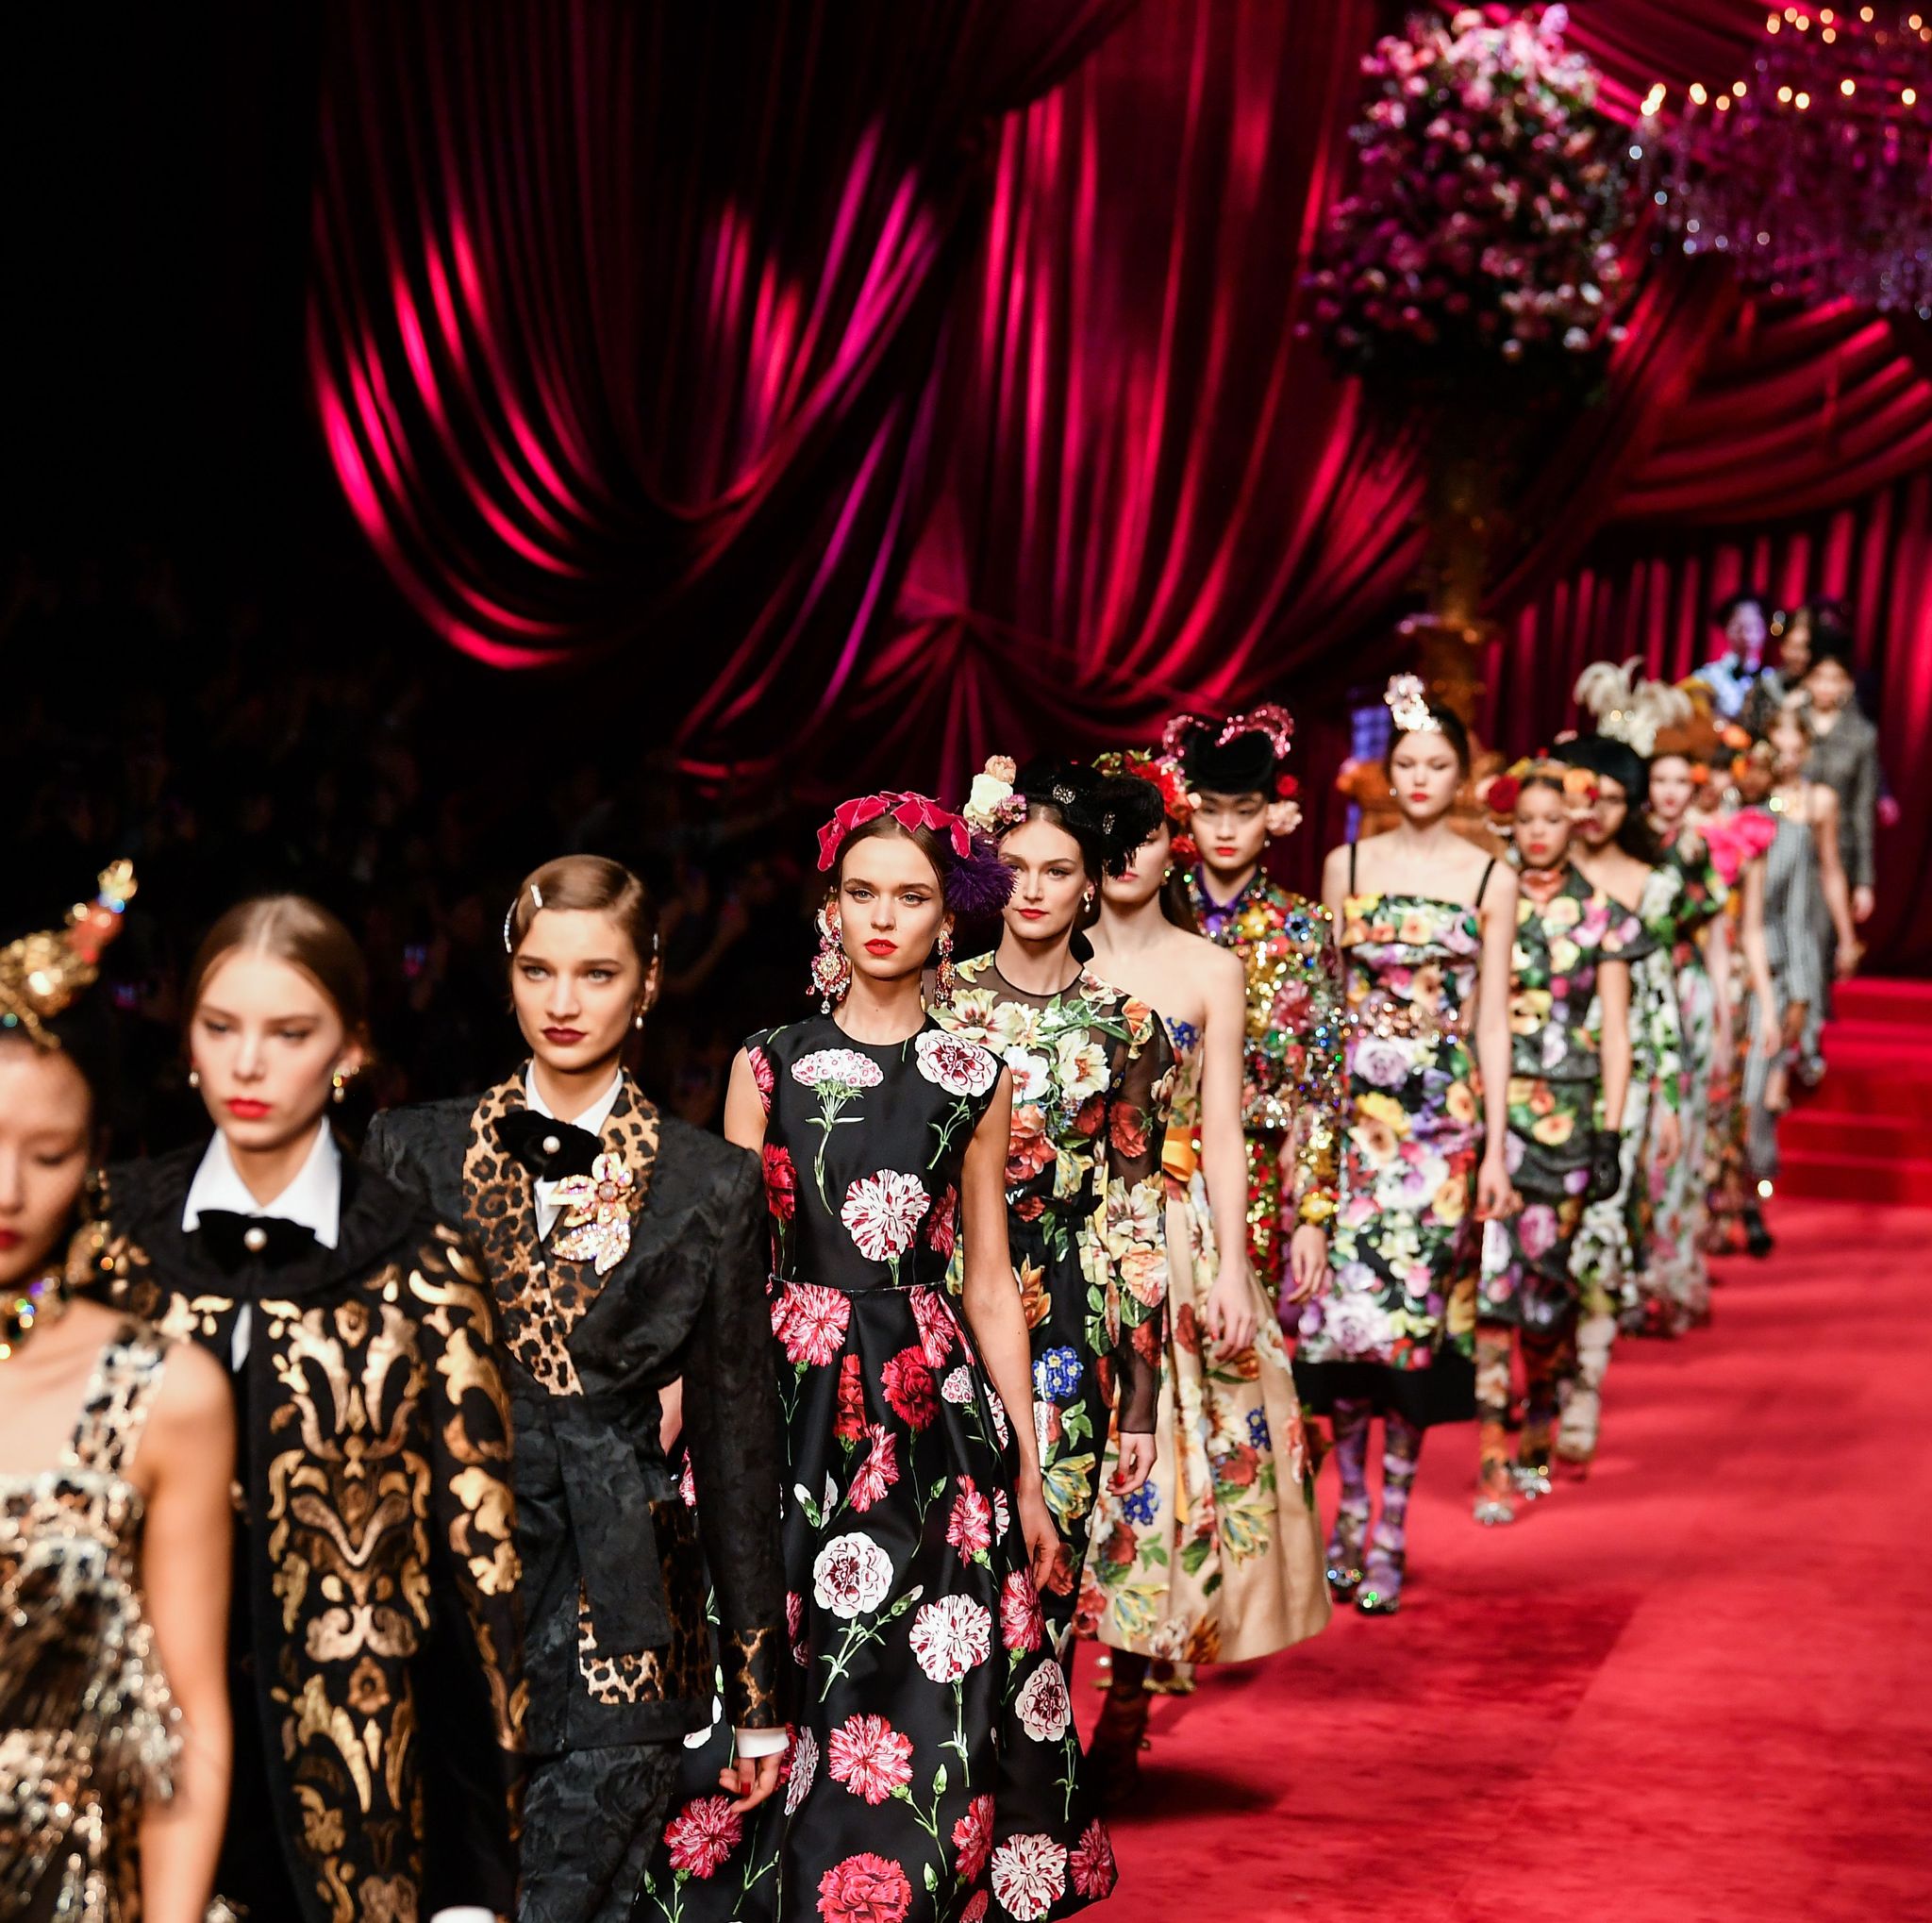 Dolce & Gabbana teams up support research coronavirus to with university